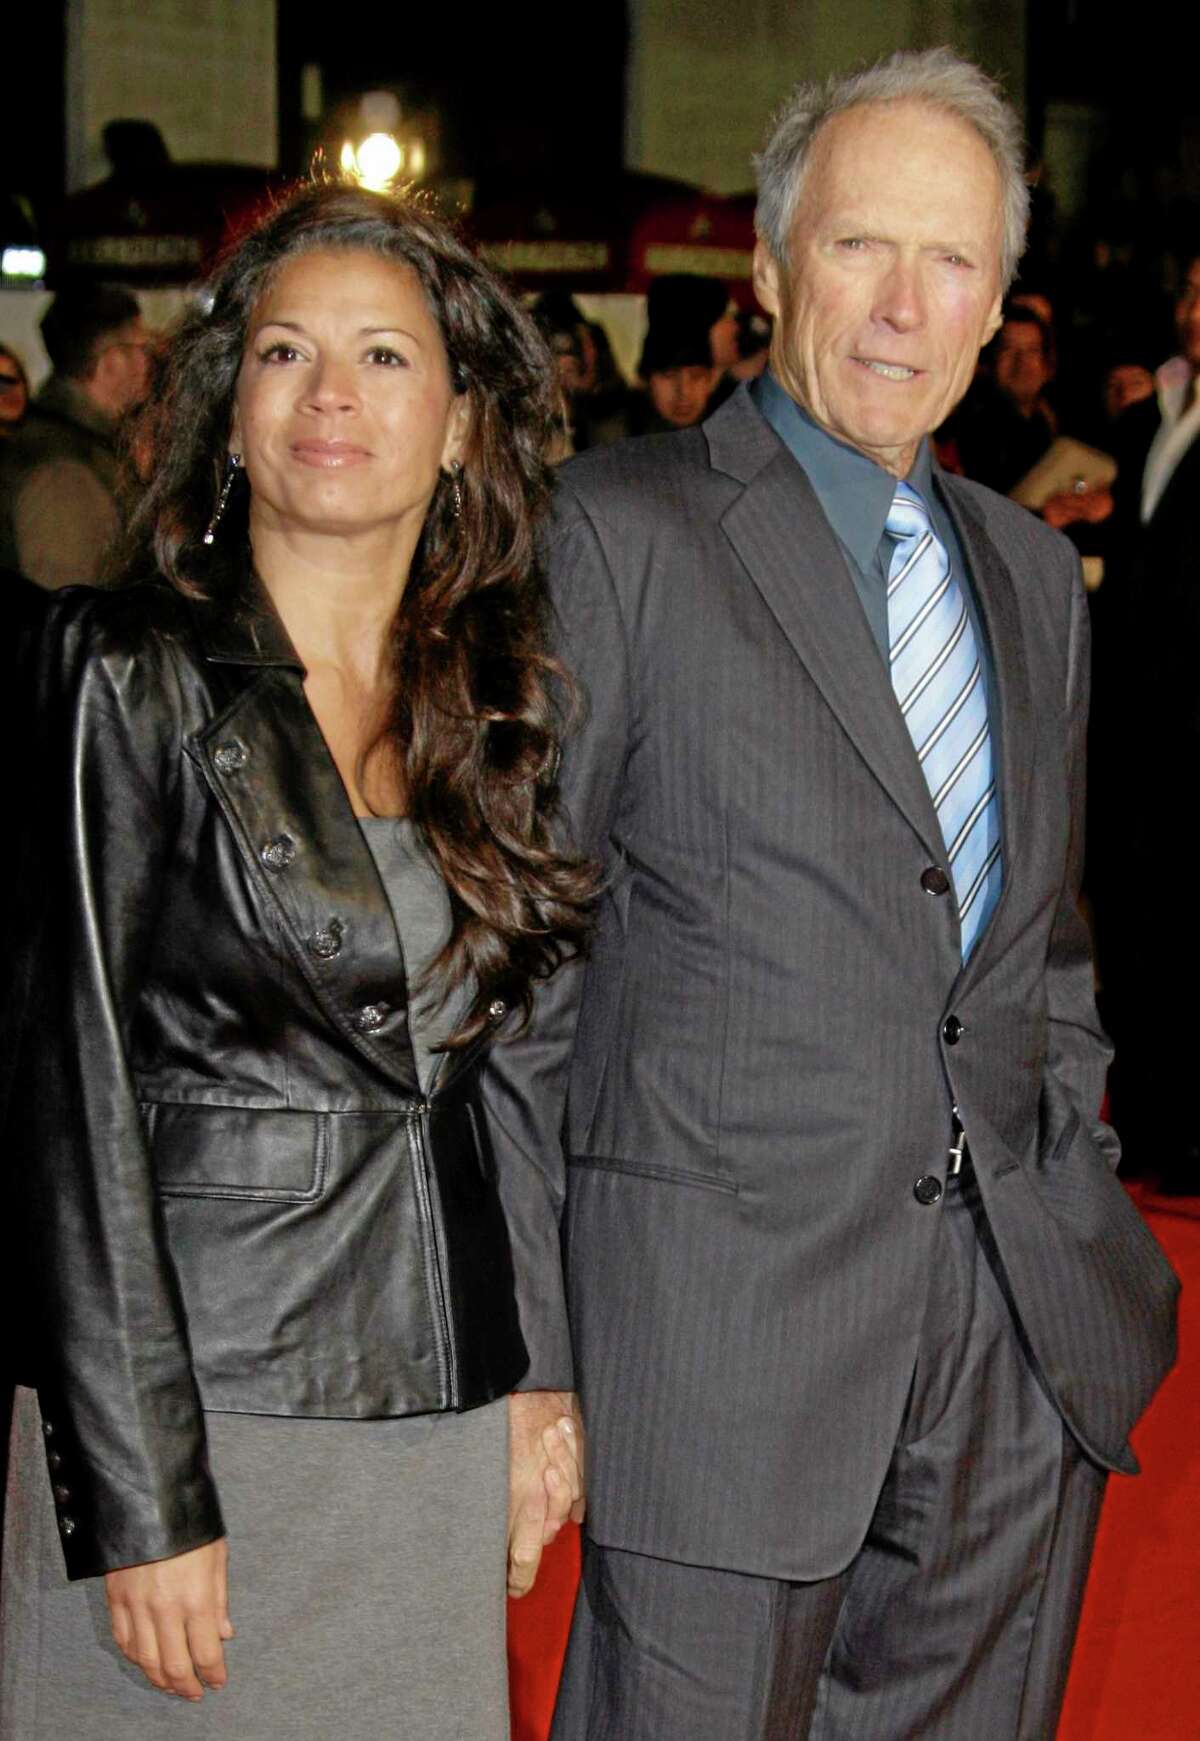 FILE - U.S Director Clint Eastwood, right, arrives with his wife, Dina on the red carpet for the UK premiere of Invictus at London's Leicester Square, in this Jan. 31, 2010 file photo. Eastwood's second wife has filed for legal separation from the actor and director. Dina Eastwood's petition filed in Monterey County Superior Court on Monday Sept. 9, 2013 seeks spousal support and physical custody of the couple's 16-year-old daughter, Morgan.(AP Photo/Joel Ryan, File)